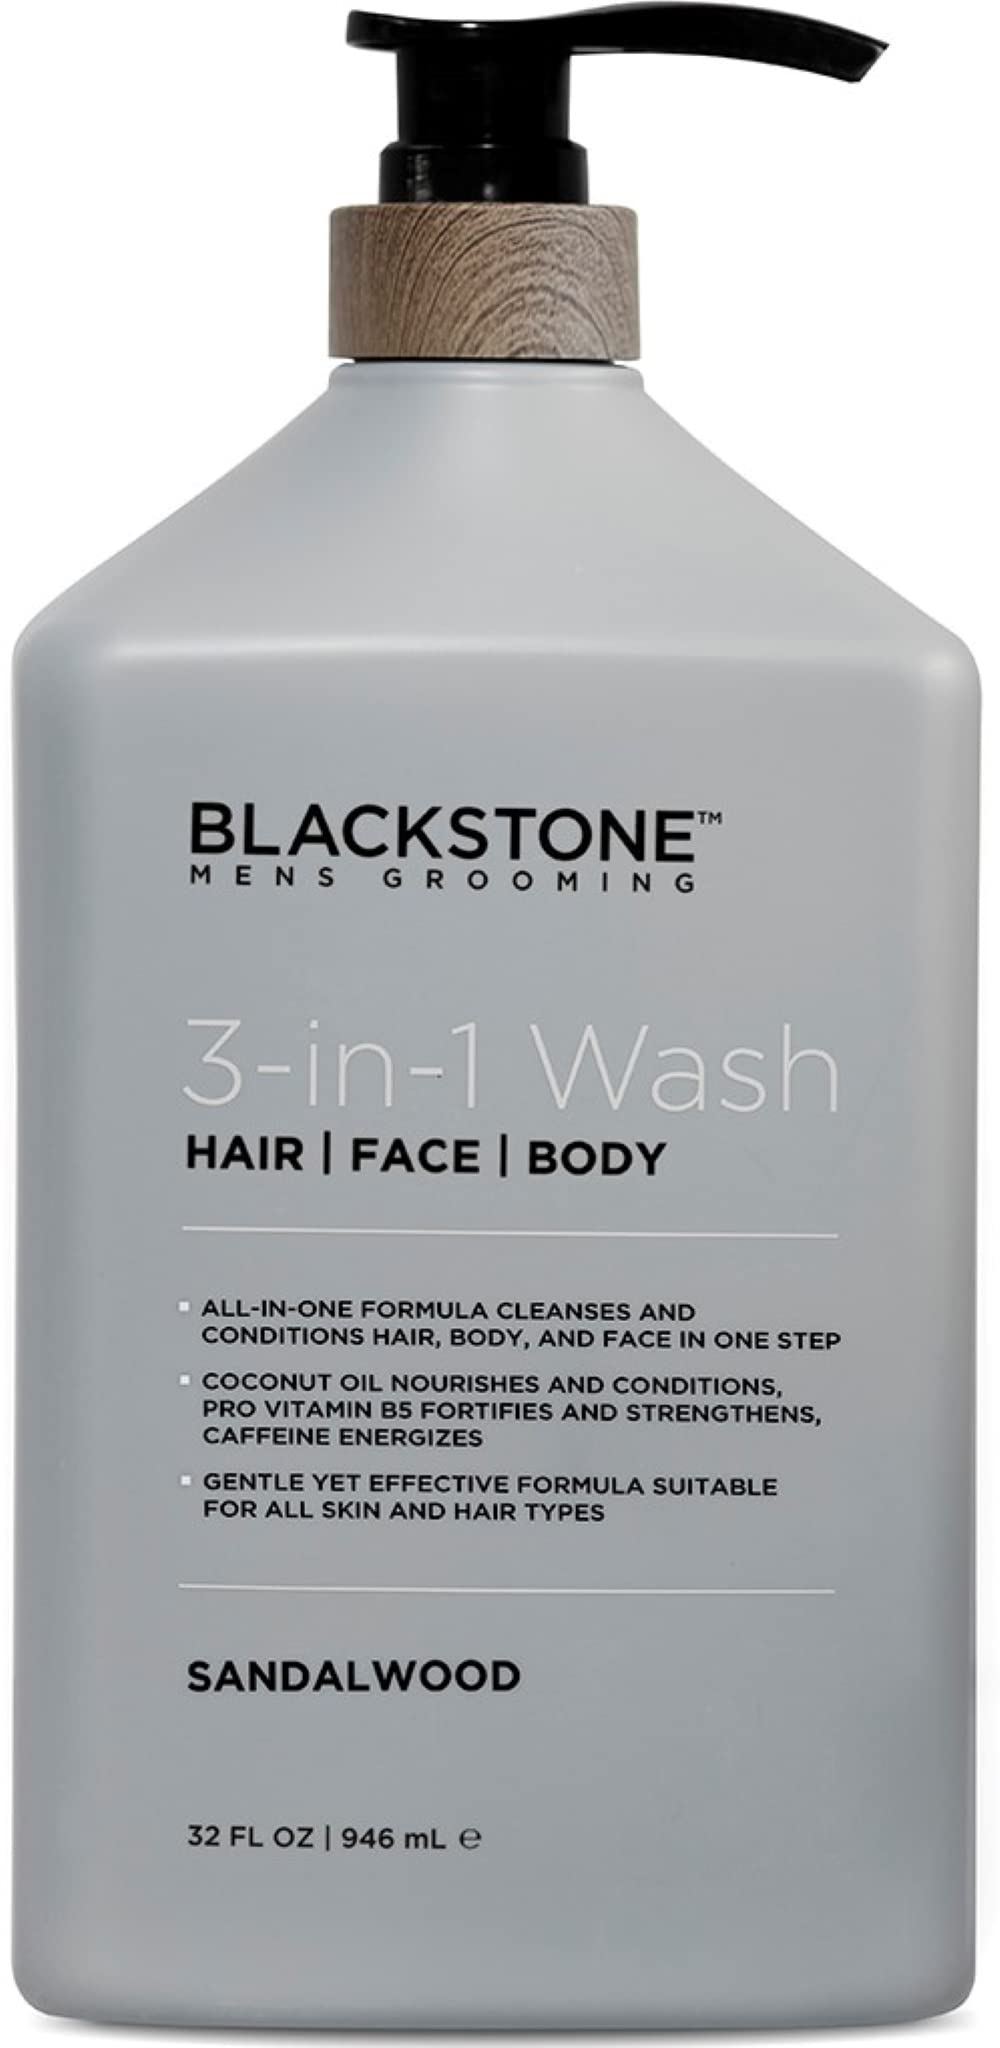 Blackstone 3-in-1 Wash for Men - Cleanses & Conditions Hair, Body, & Face | Mens Body Wash For All Skin & Hair Types | With Coconut Oil & Vitamin B5 - Sandalwood, 35 fl oz